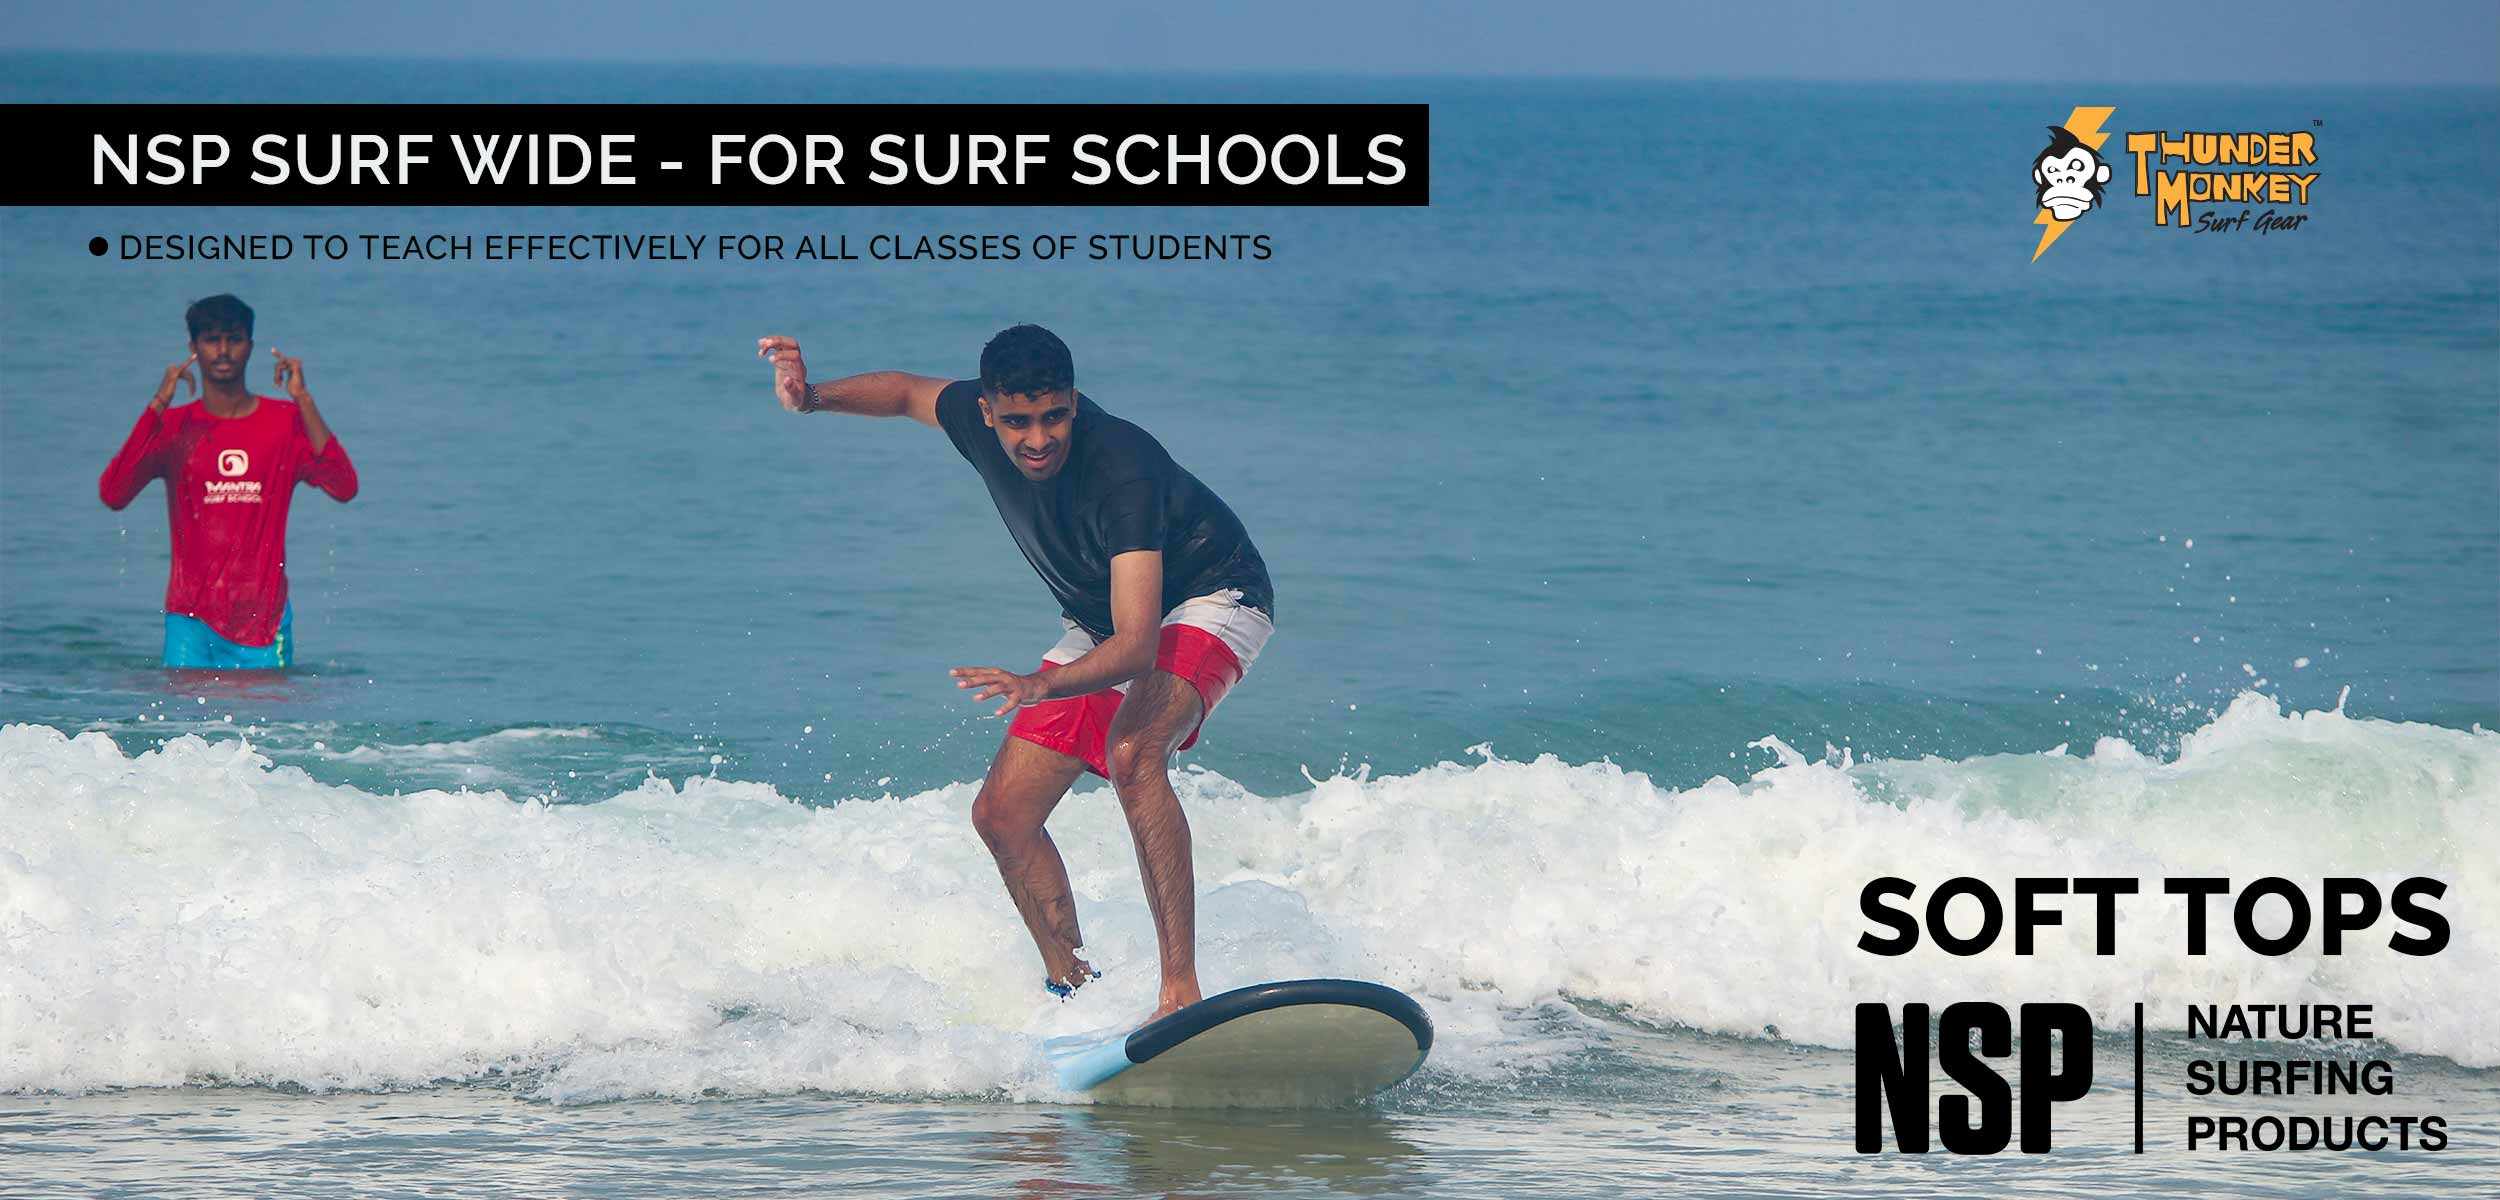 India's Own Surf Gear Brand - Surfboards and Surf Wear